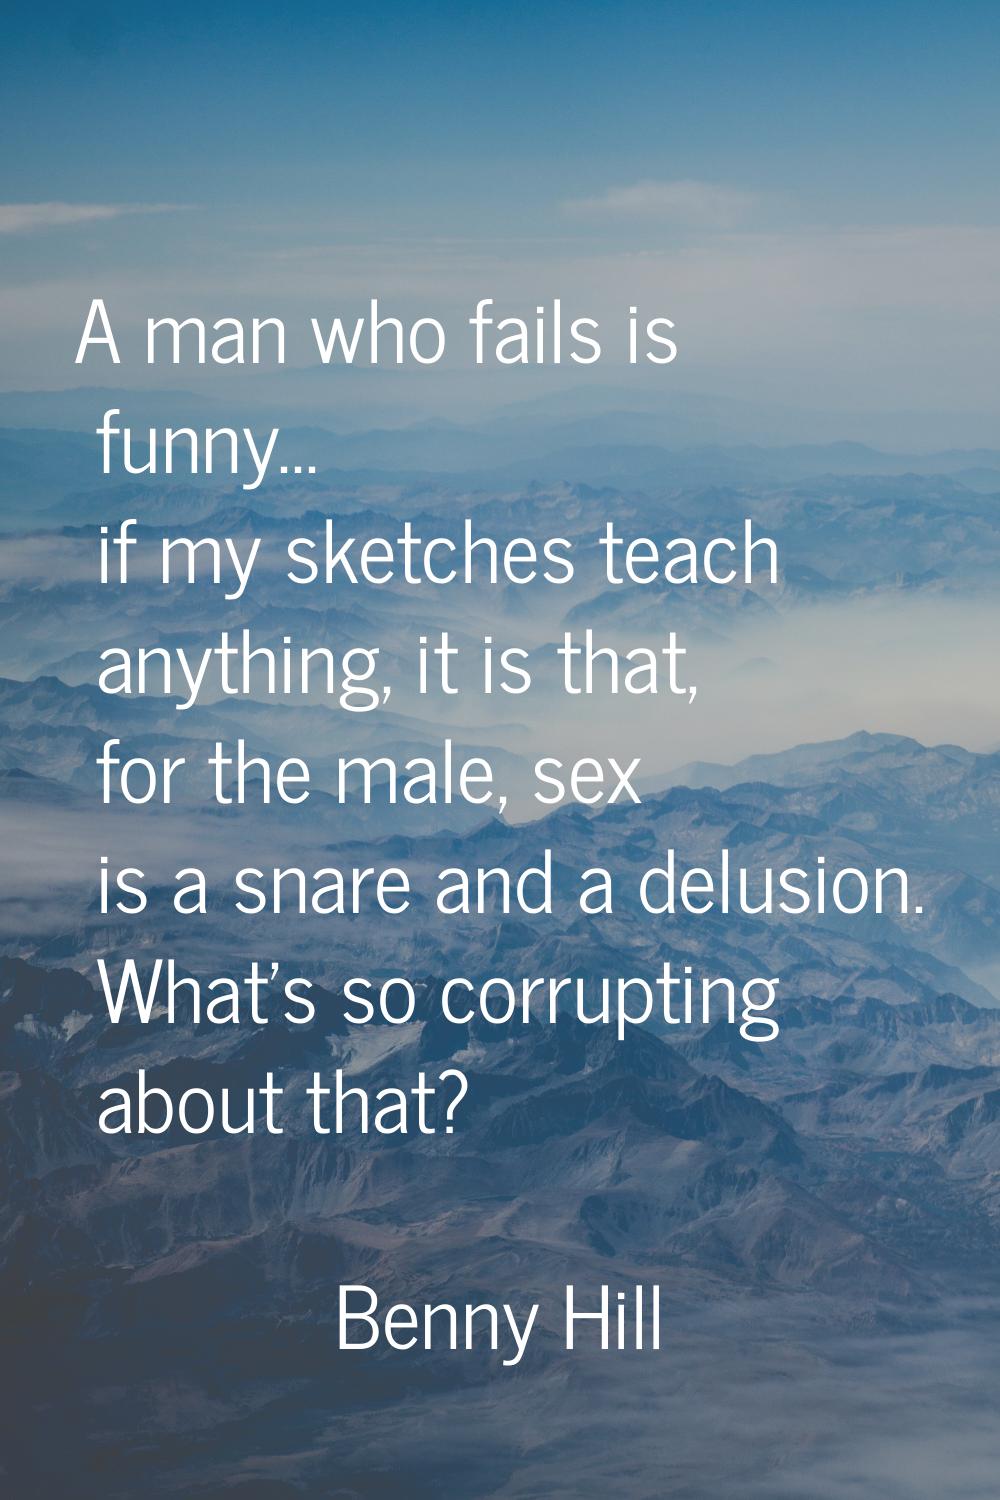 A man who fails is funny... if my sketches teach anything, it is that, for the male, sex is a snare